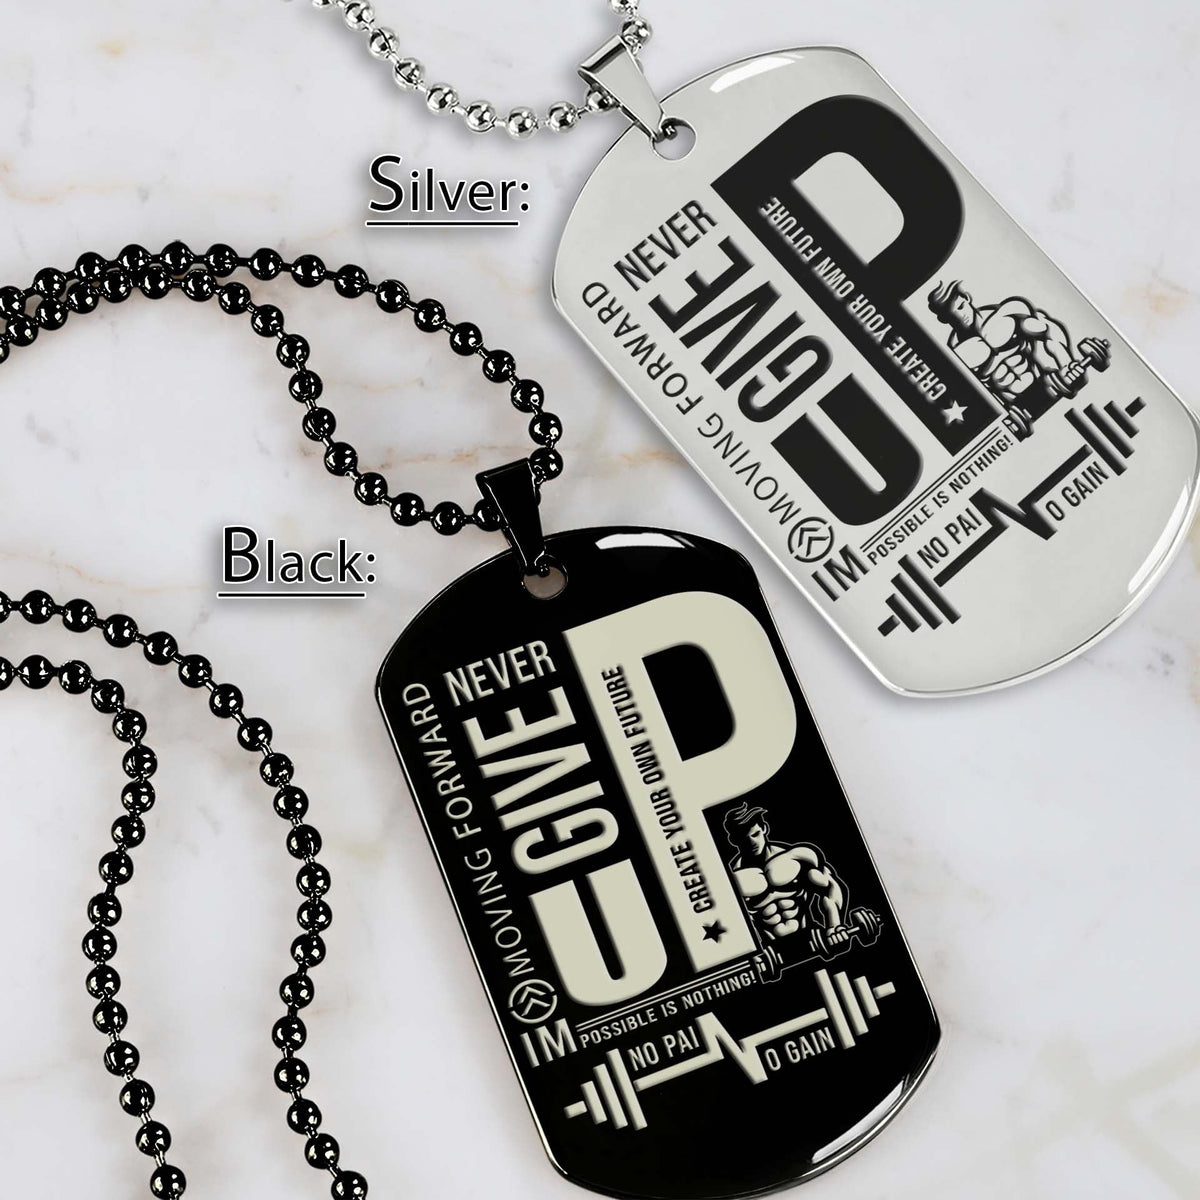 Fitness Man - Never Give Up - The Pain You Feel Today Is The Strength You Feel Tomorrow - Gym - Fitness Center - Workout - Gym Dog Tag - Gym Necklace - Engrave Dog Tag